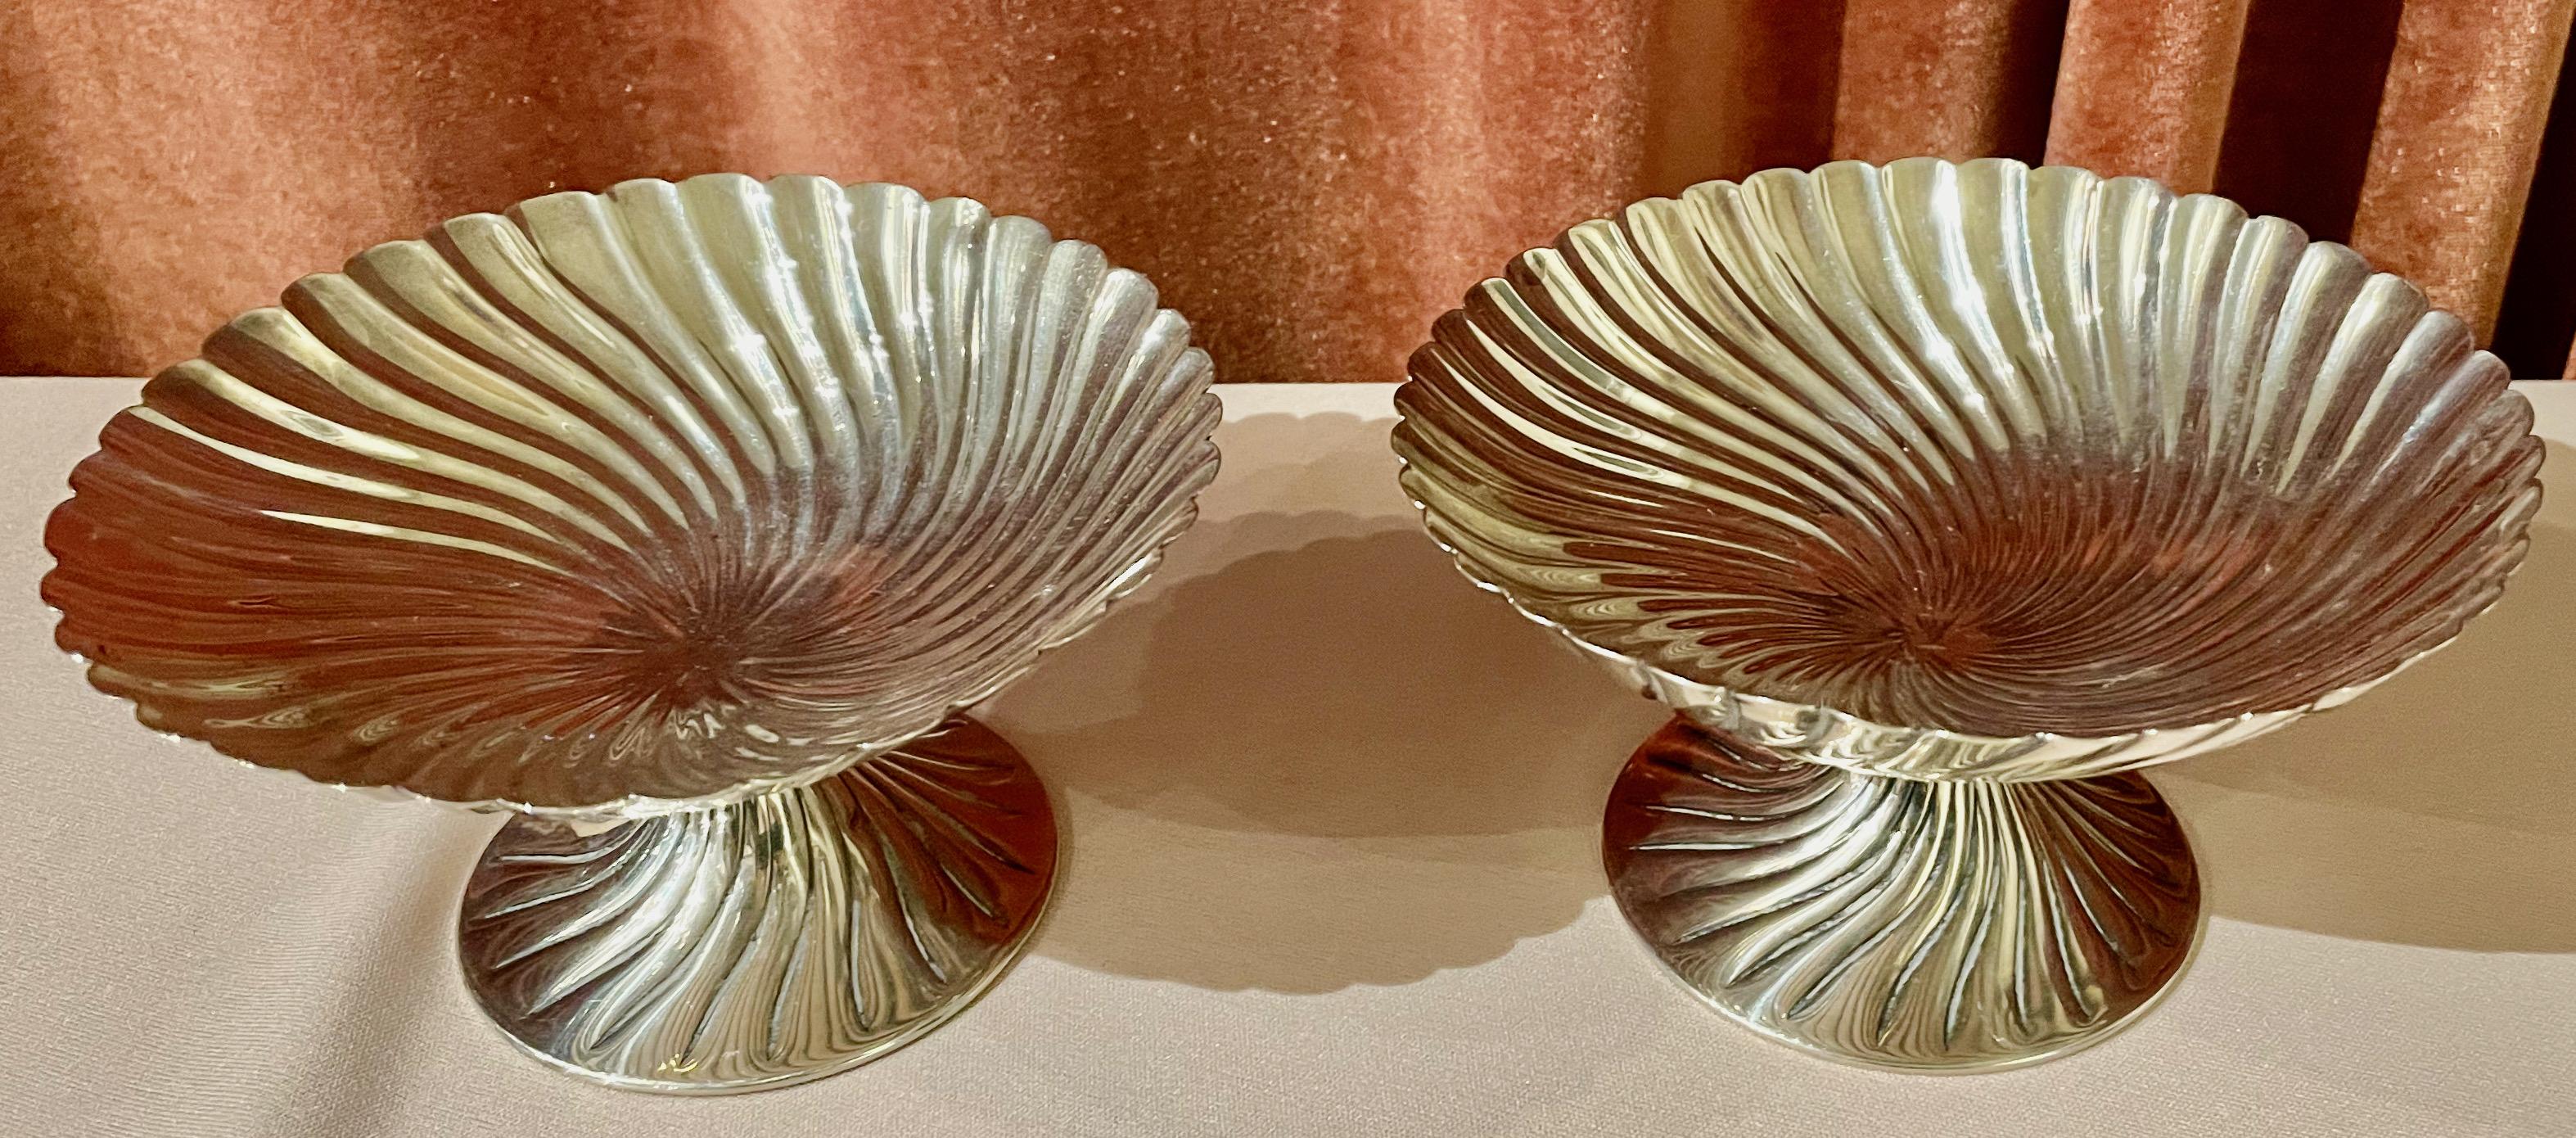 Josef Hoffmann for Wiener Werkstatte Vienna circa 1920 silver dish pair. A quality pair of dishes or bowls hand chased, made of silver and hallmarked on the side top. Manufacture: ‘Wiener Werkstätte’ ’Vienna Workshop’ Dating: circa 1920.

Josef